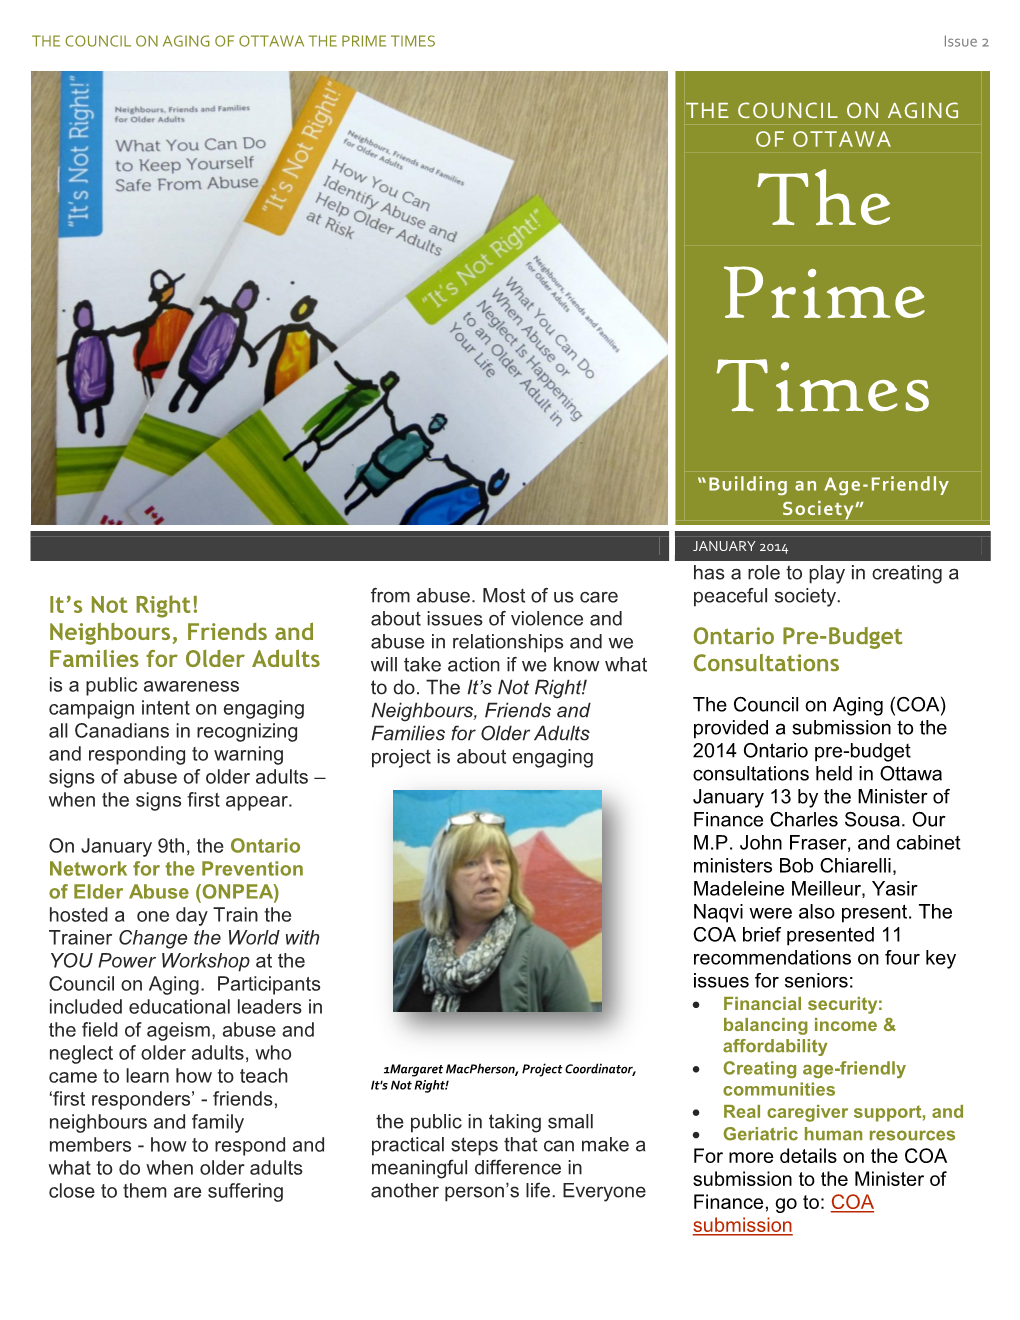 THE PRIME TIMES Issue 2